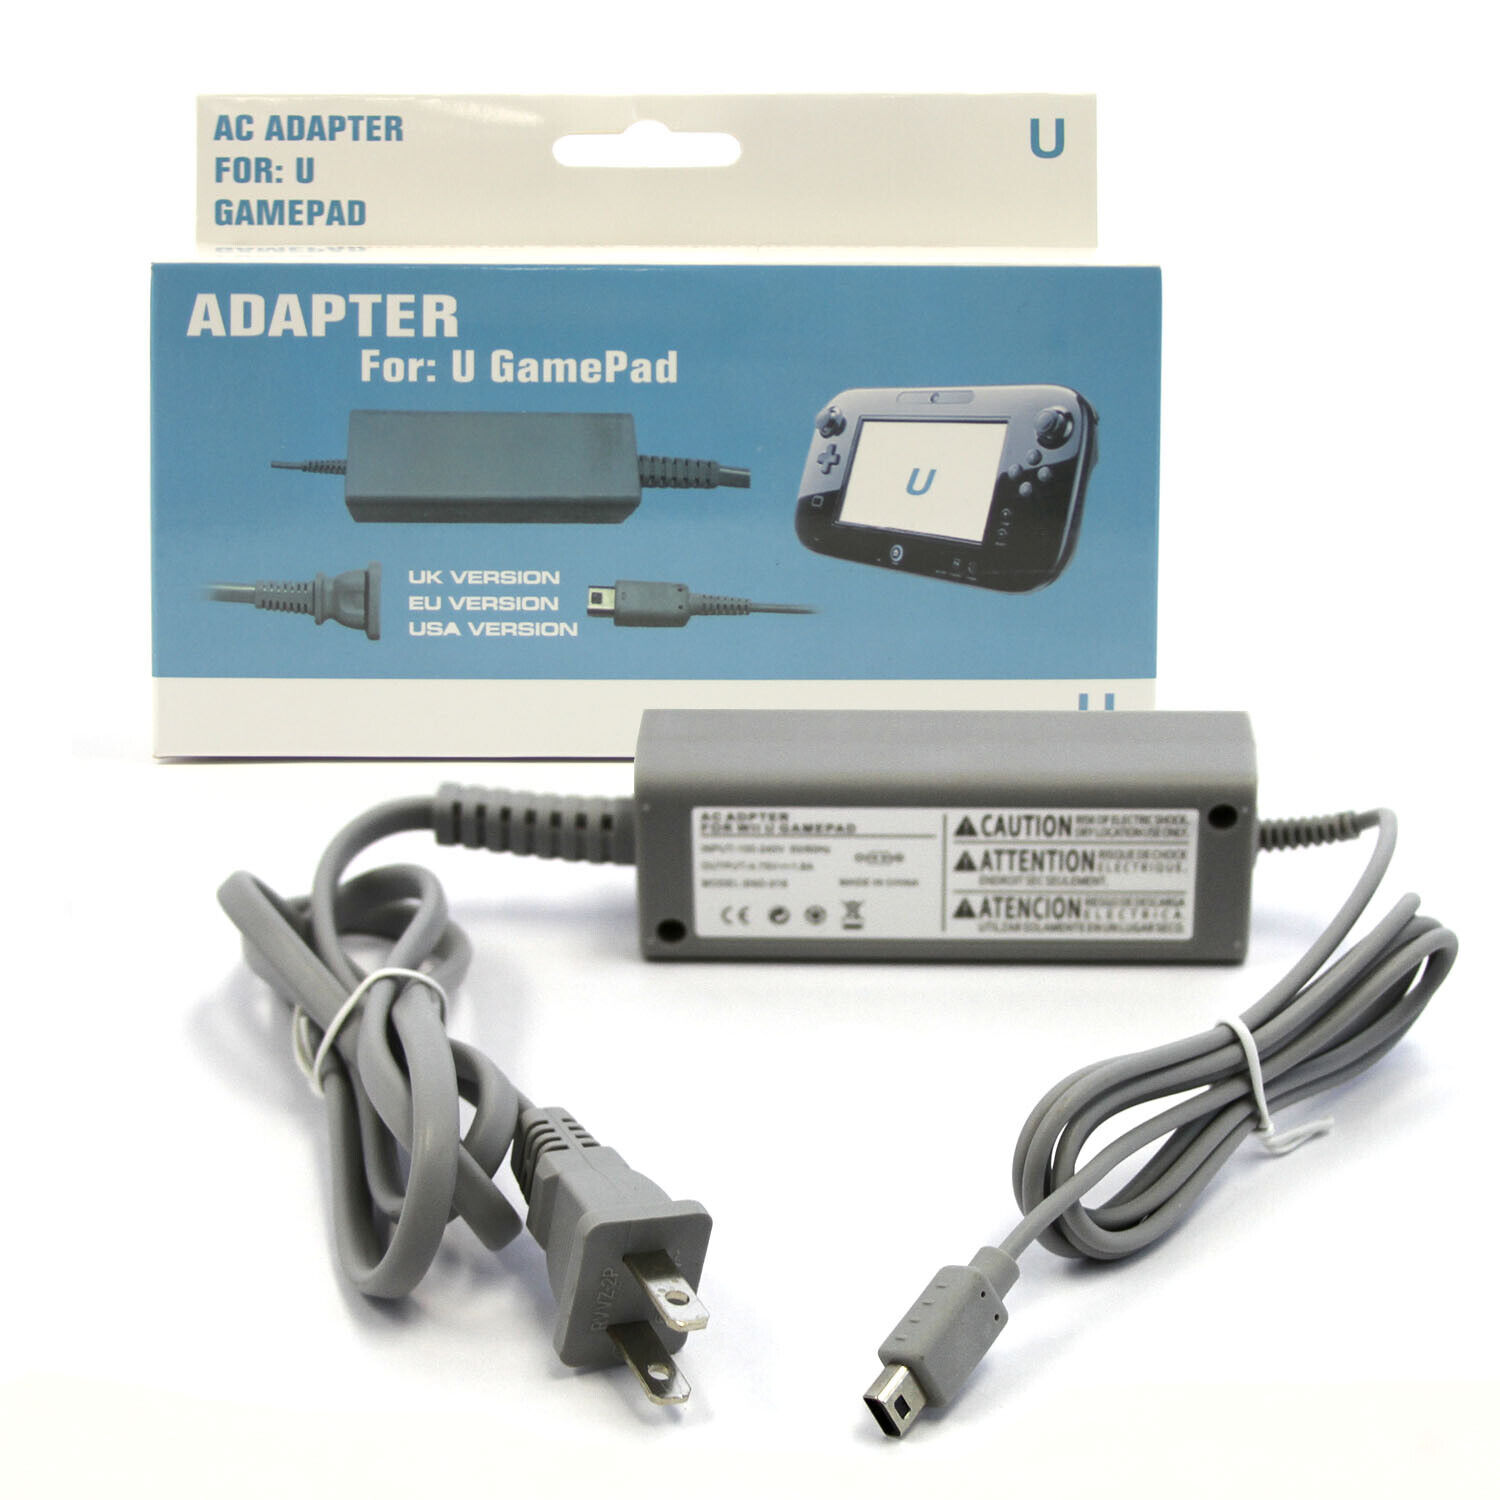 *Brand NEW*Hexir (WiiU Wall Power Cable Adapter) Wii U - 110V-220V Gamepad AC Charger Cord